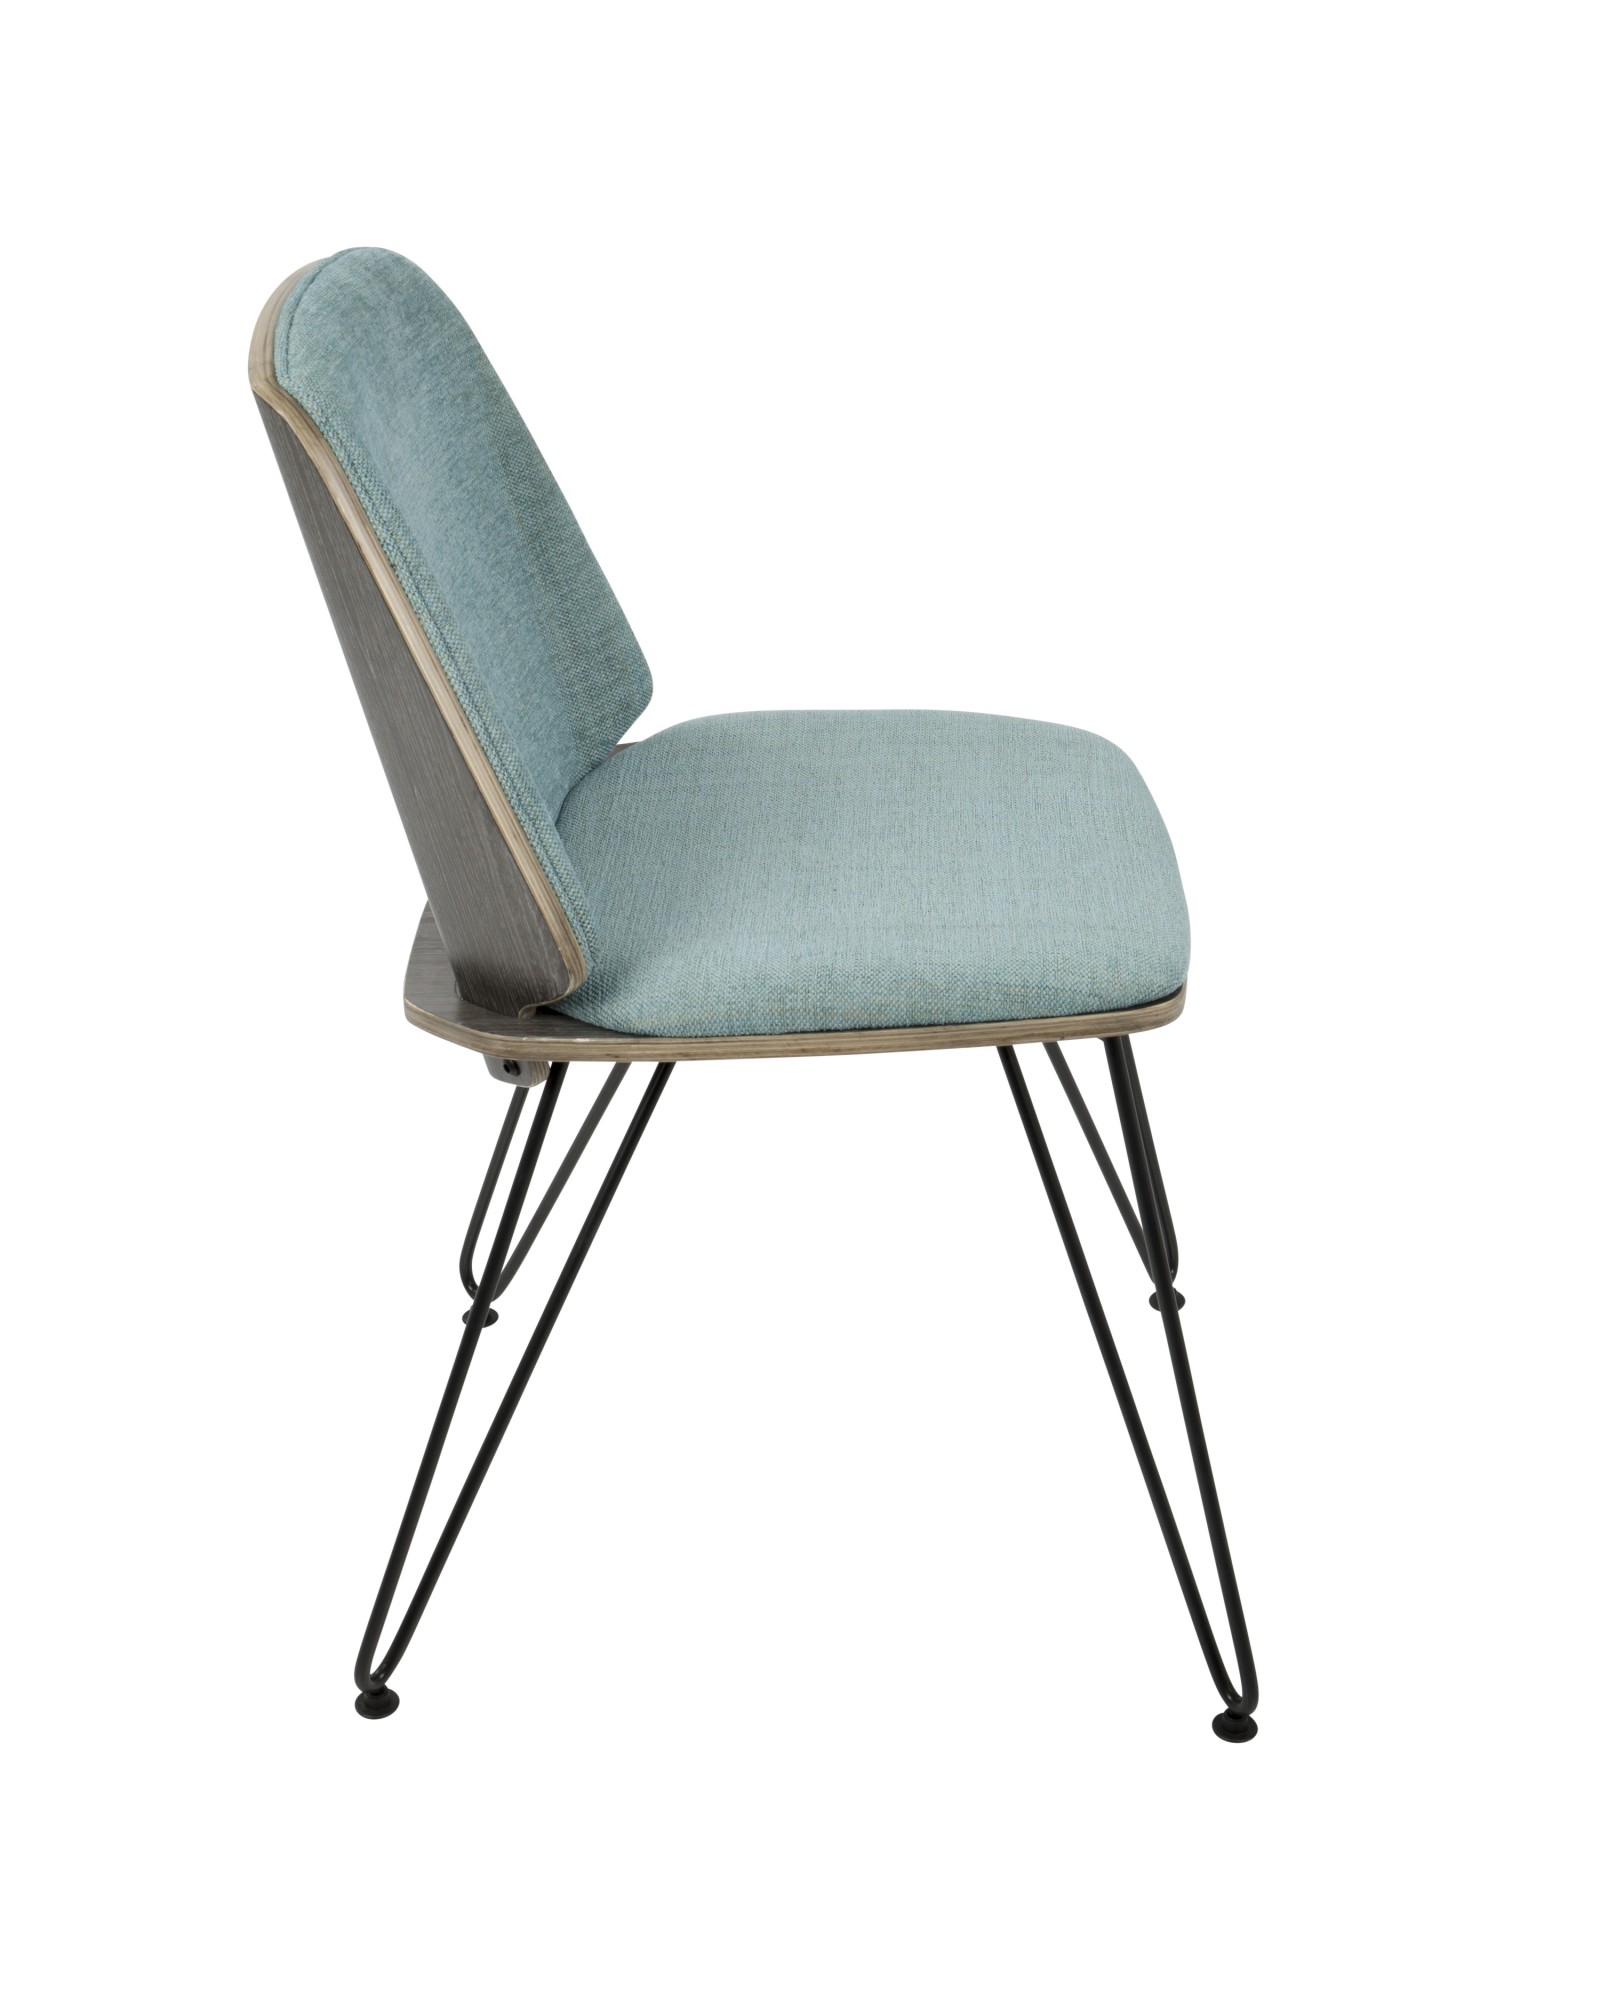 Avery Mid-Century Modern Dining/Accent Chair in Dark Grey Wood and Teal Fabric - Set of 2